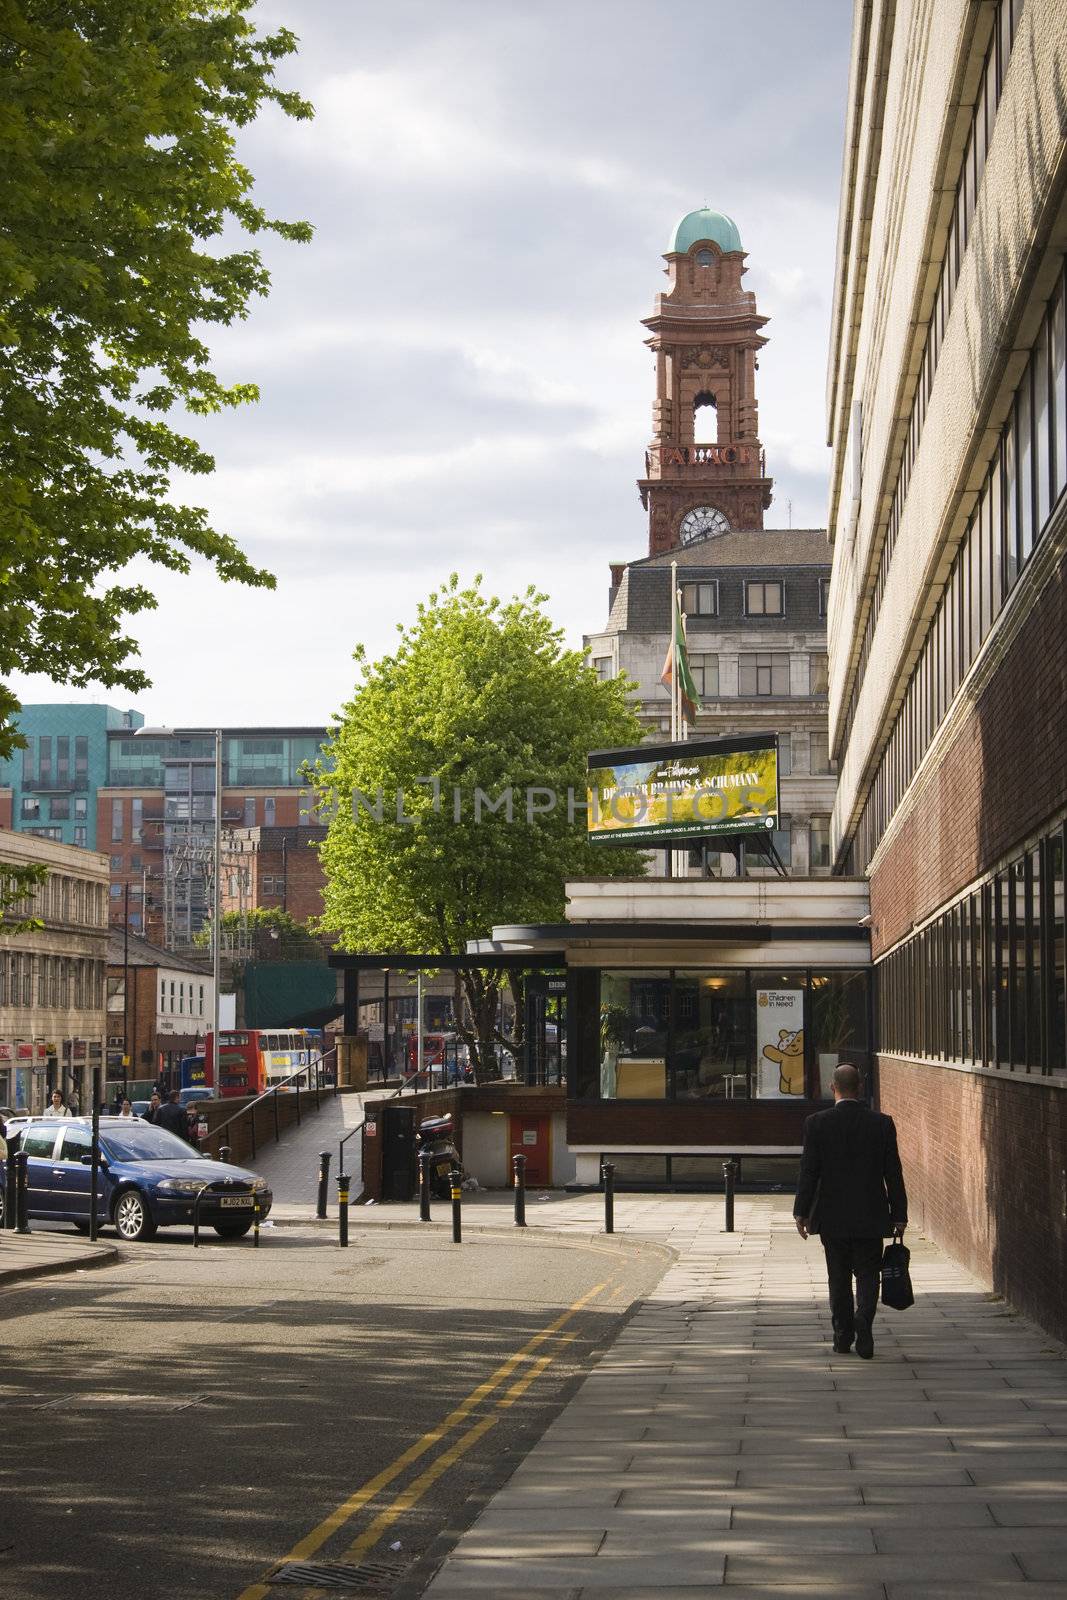 View of the BBC entrance and the Palace hotel tower on Oxford Road in manchester